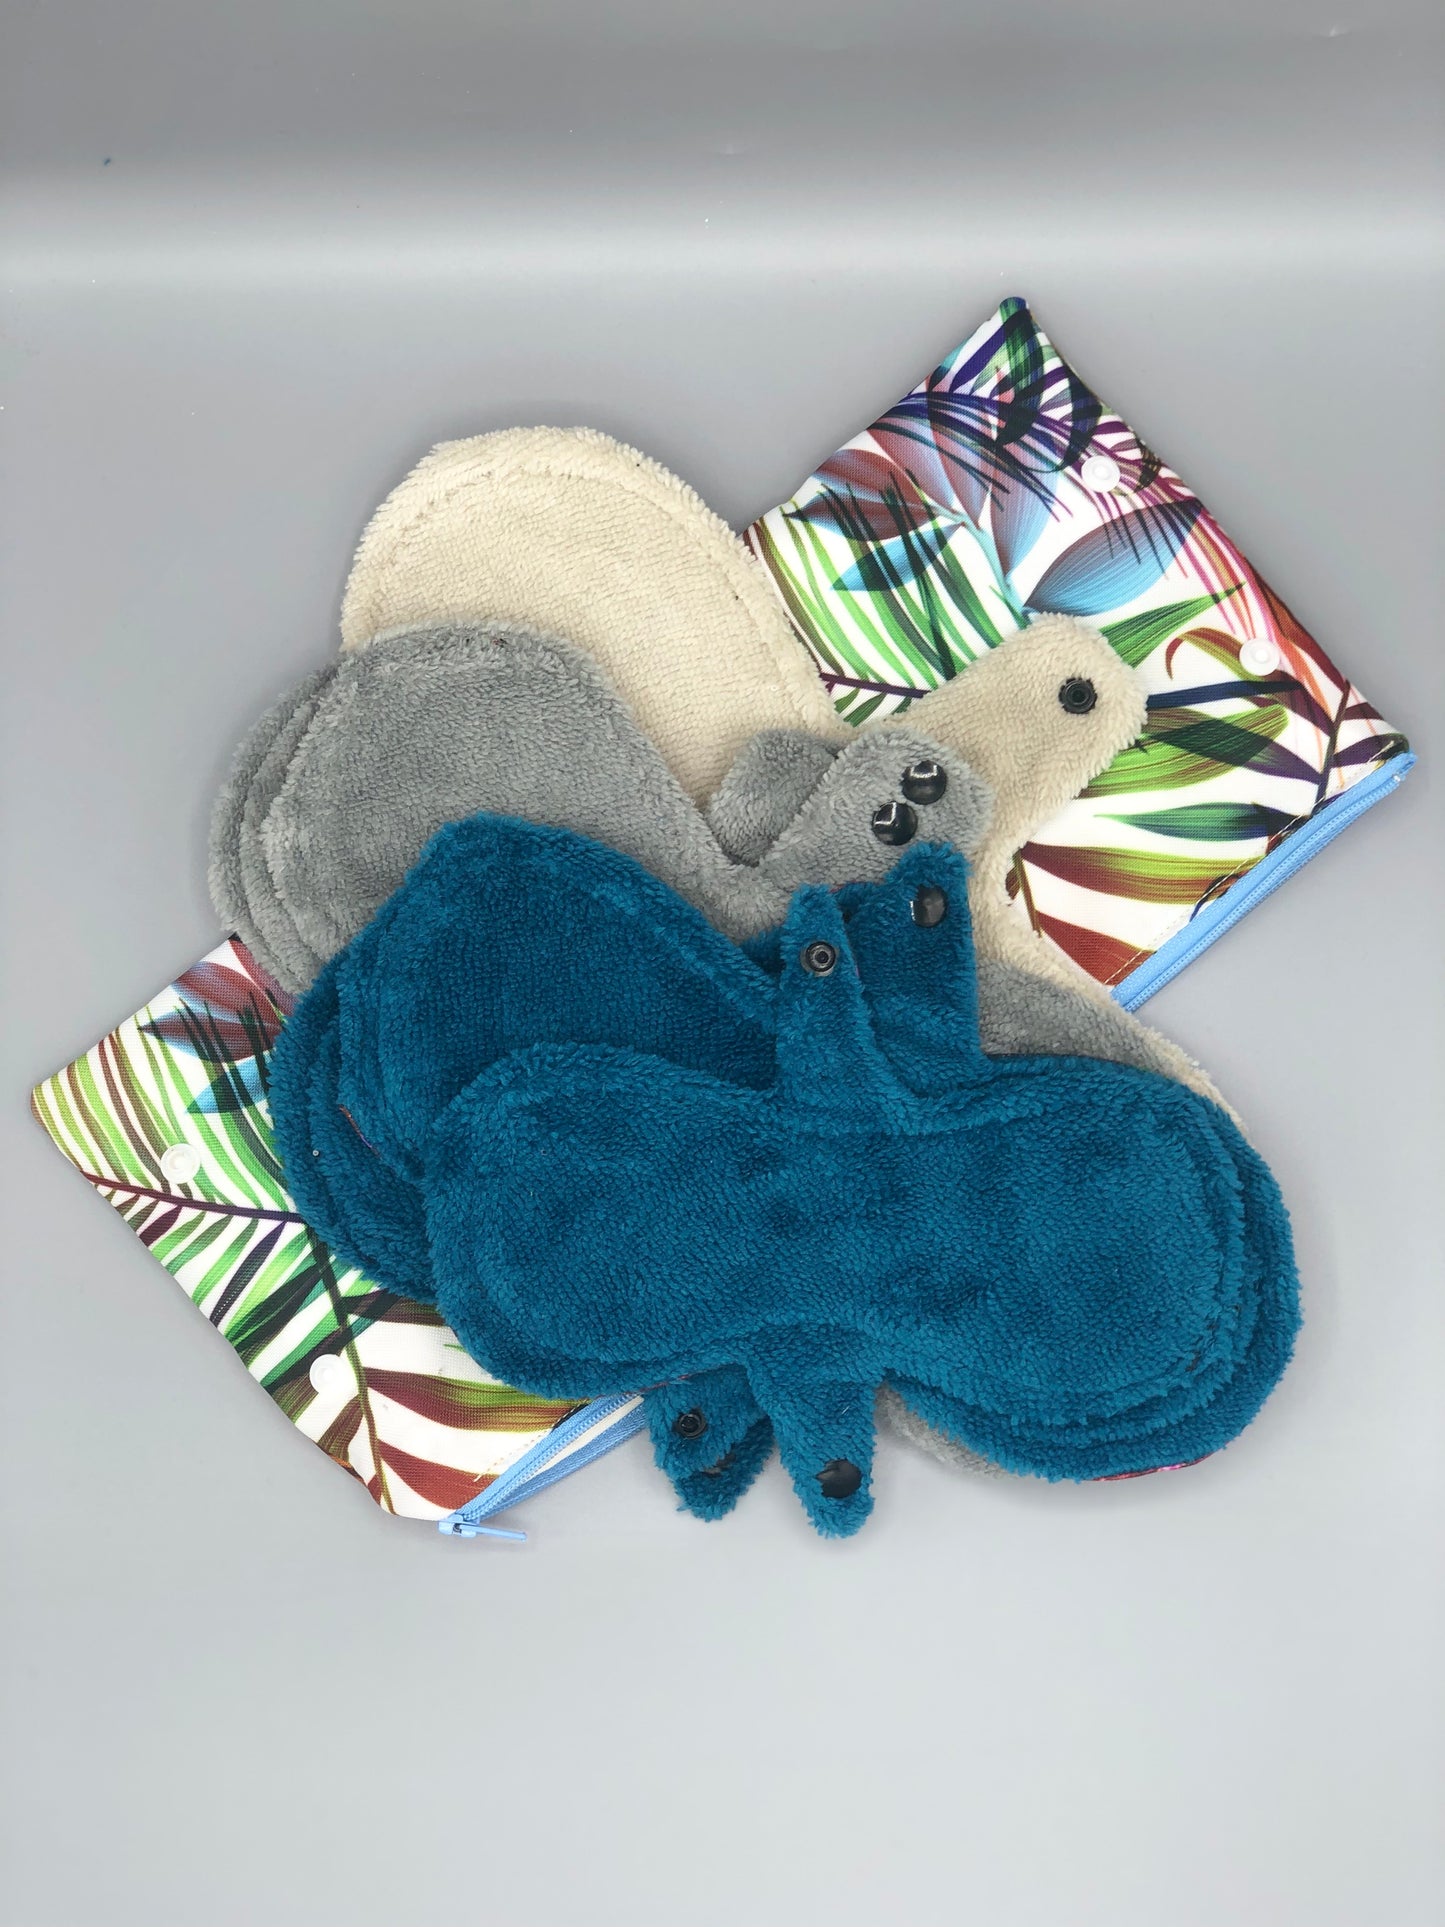 Luxury Reusable Sanitary Pads - super absorbent, eco friendly alternative to disposable sanitary pads